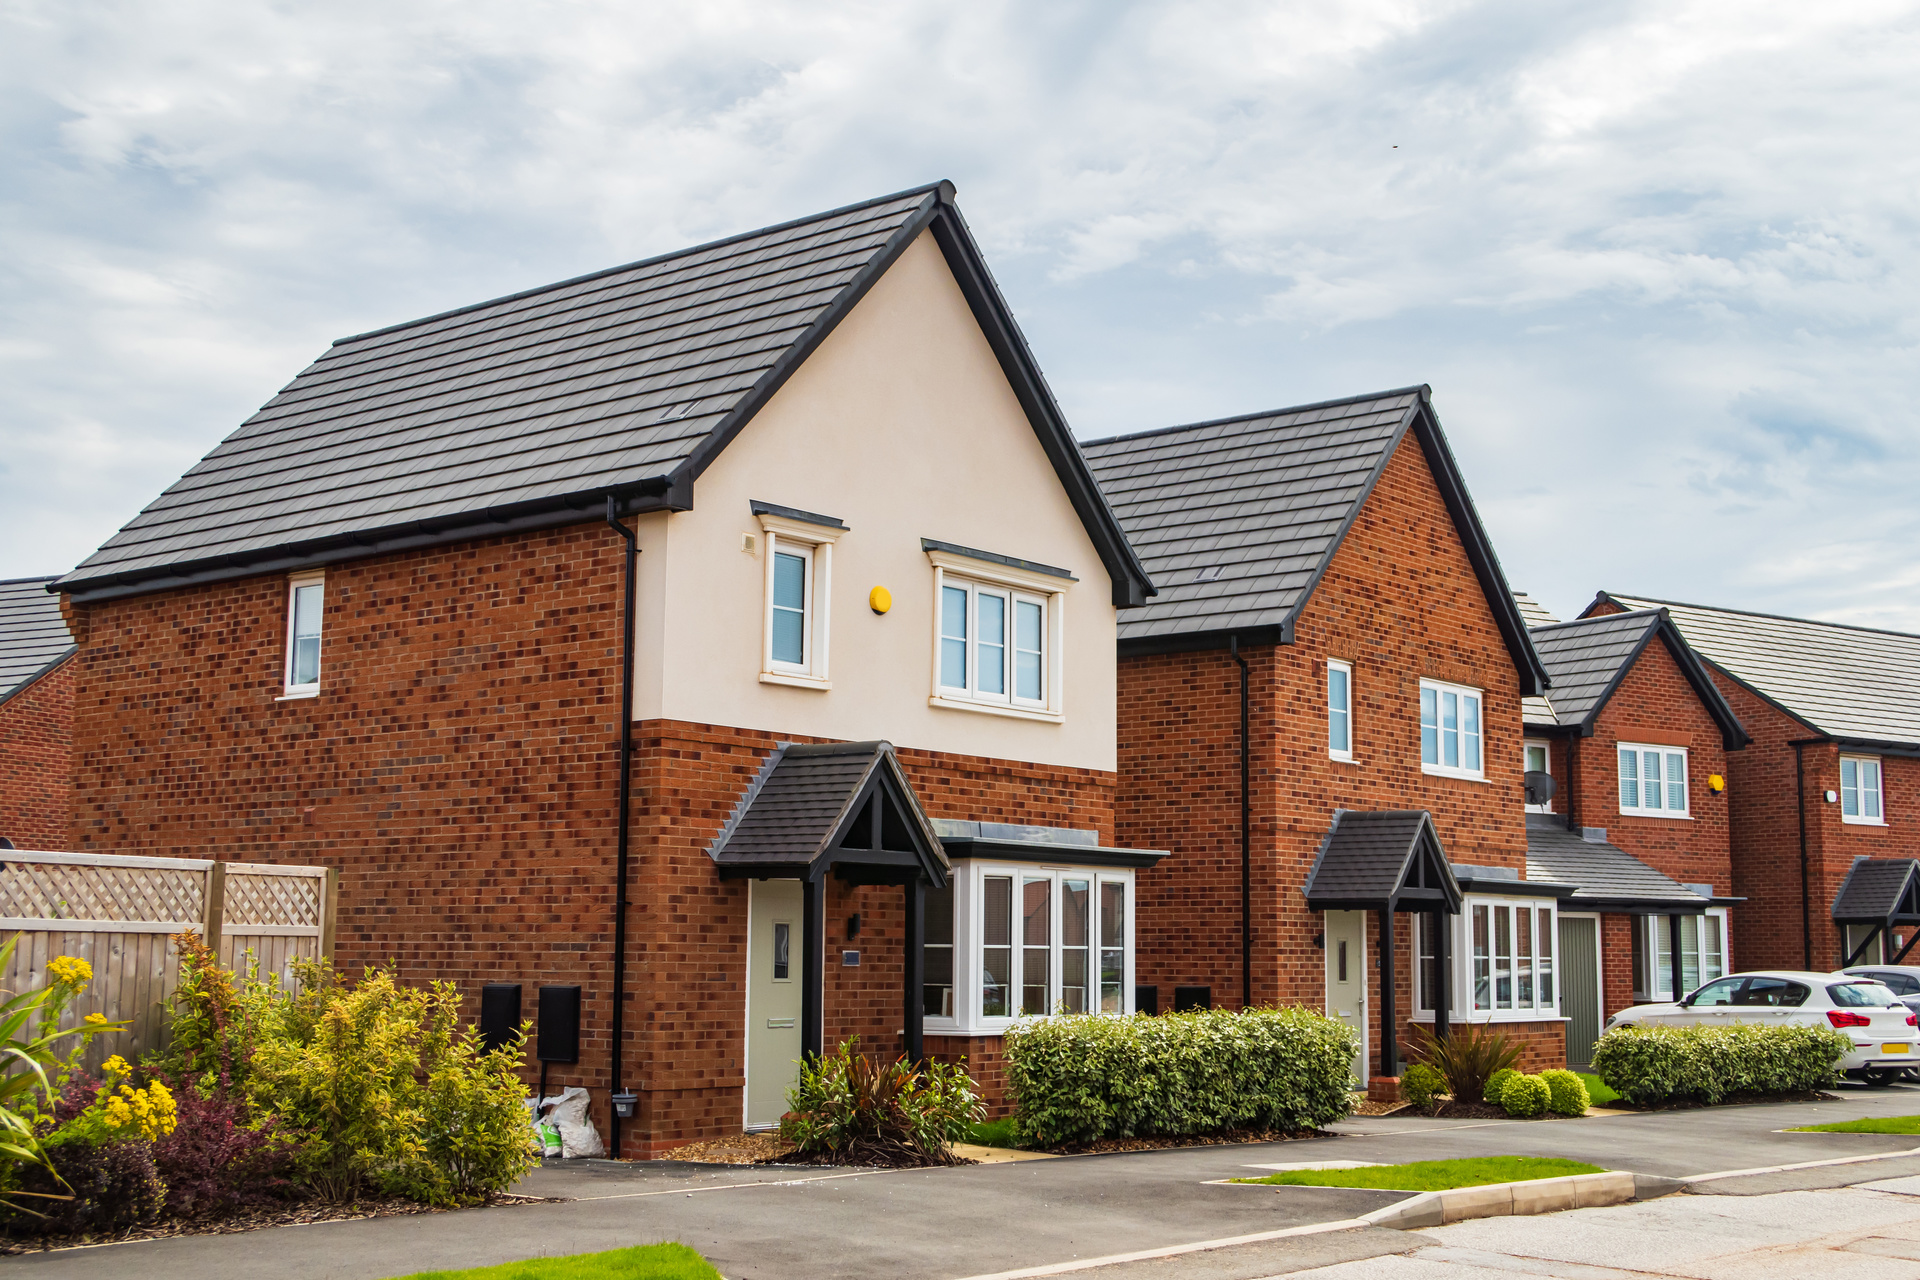 A new build housing estate, showing three detached houses, with similar exteriors, driveways and shrubbery; our Conveyancing Solicitors in Preston discuss new build housing trends in 2024.